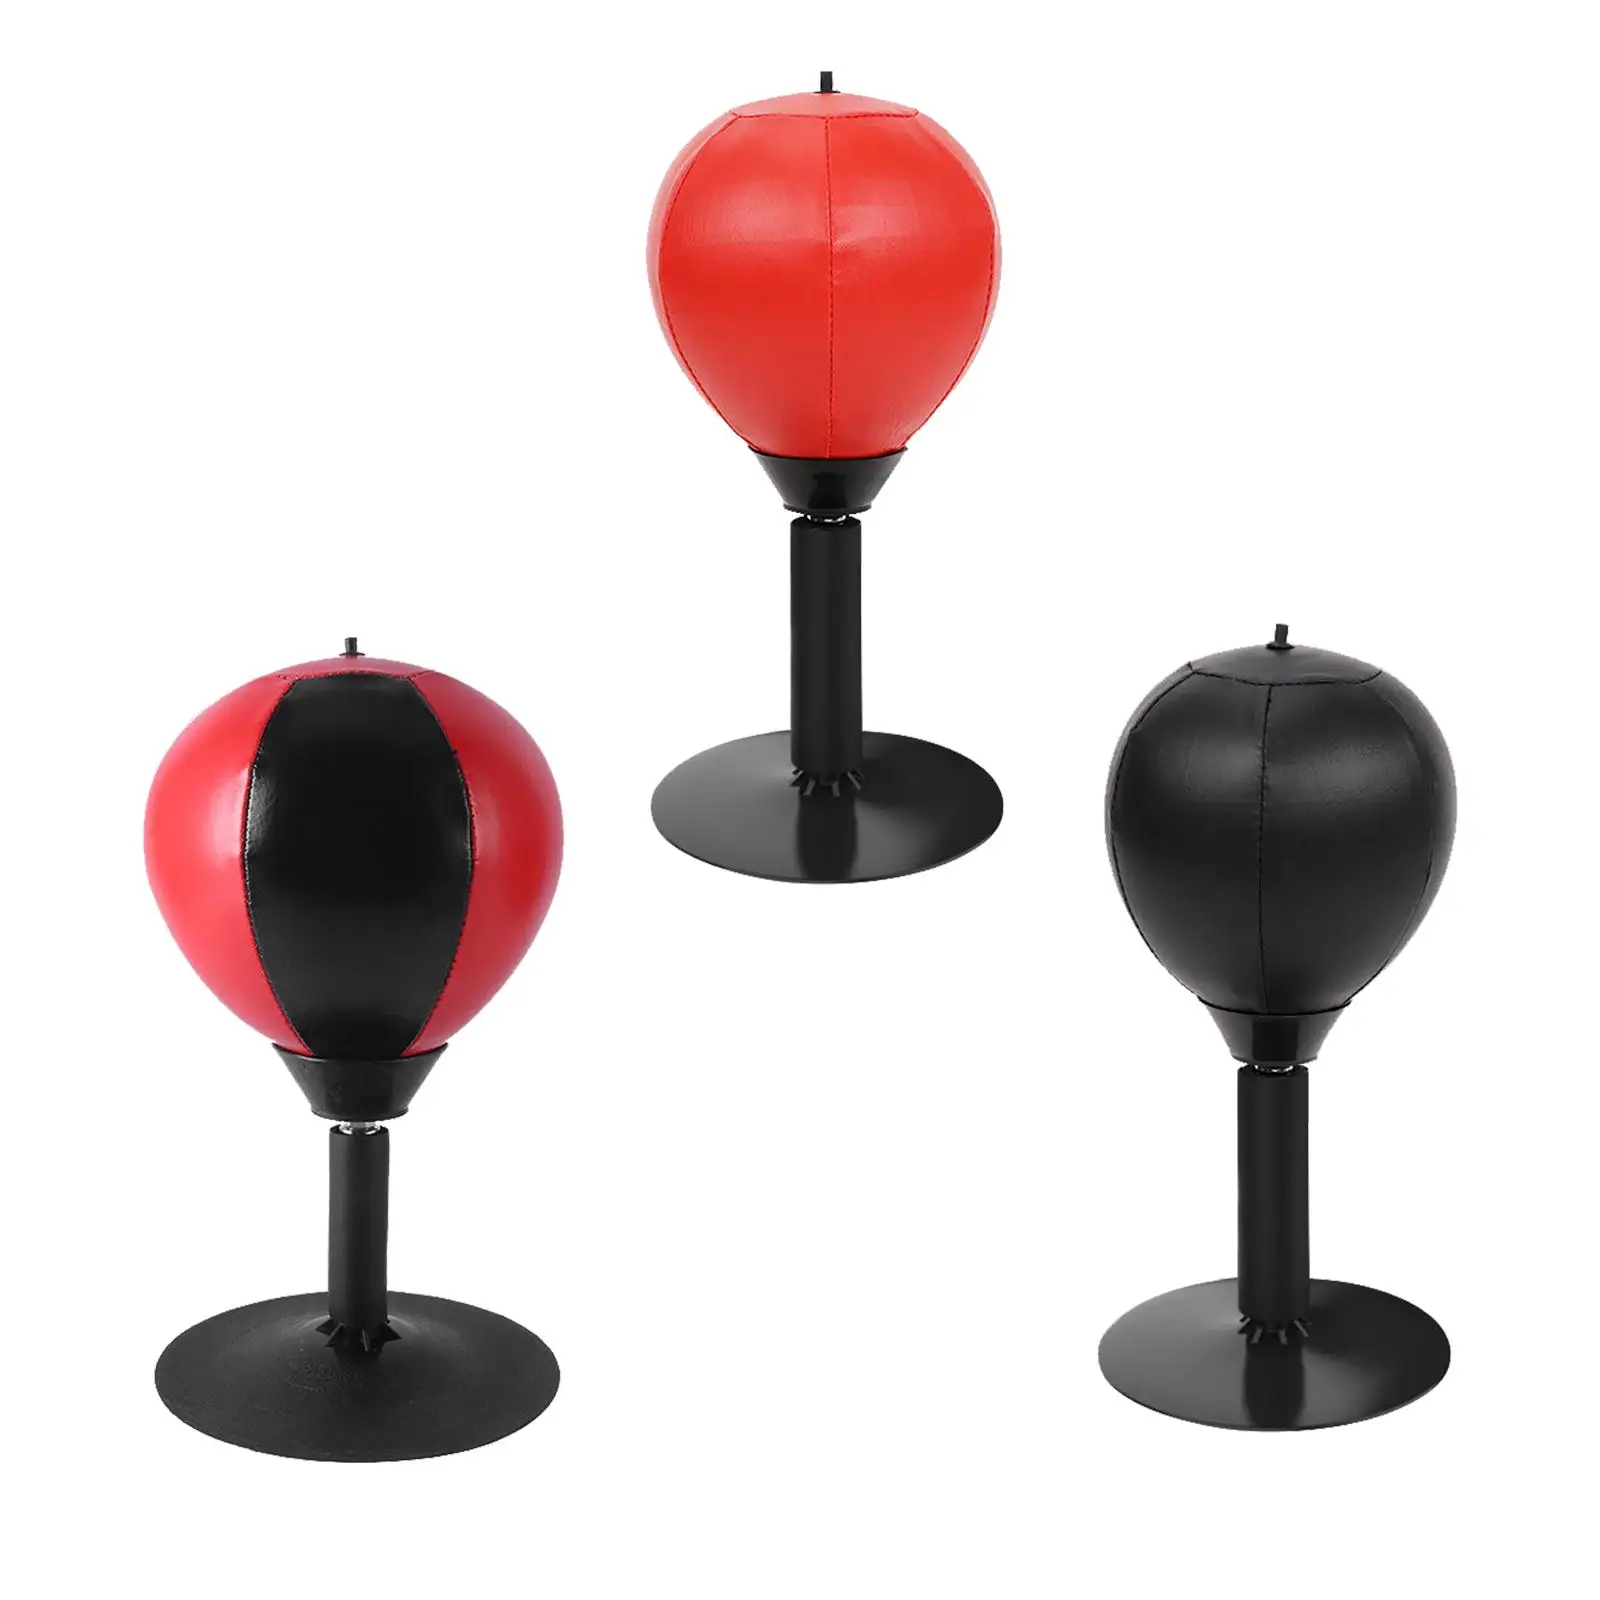 PU Punching Bag Speed Ball Suction Cup Freestanding Desktop Boxing Ball for Boxing Training Exercise Practice Fitness Equipment